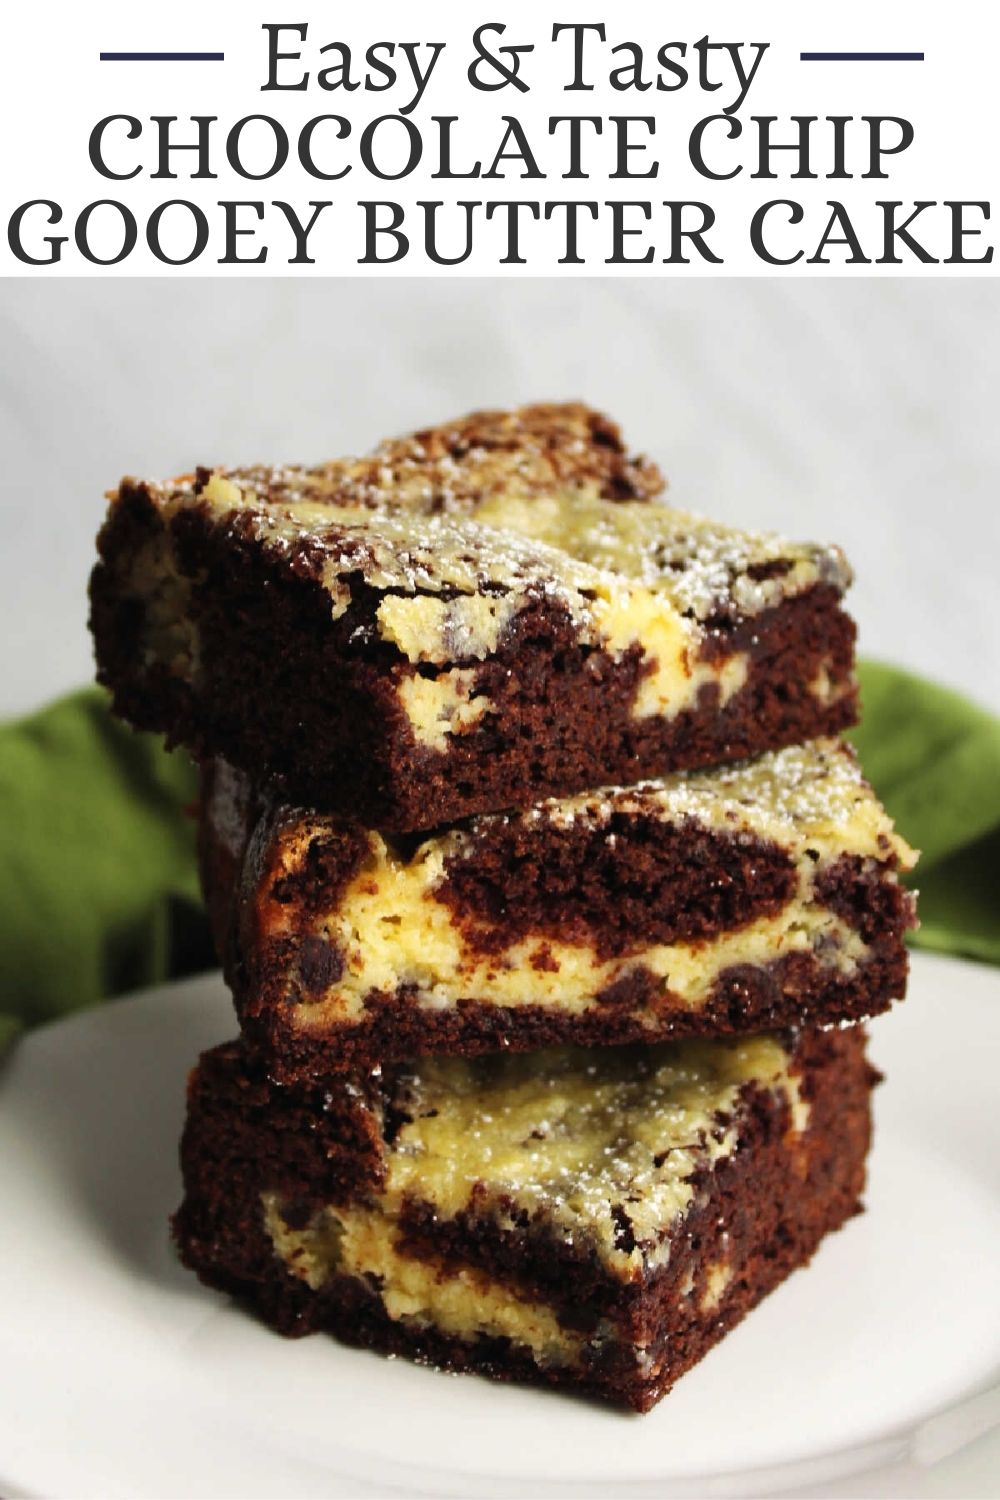 This is the gooey butter cake recipe for chocolate lovers. It uses a chocolate cake mix for the base layer and adds chocolate chips to the cream cheese layer for the perfect chocolaty twist on the St. Louis classic. It is easy to make and perfect for potlucks, bbqs, parties and more.